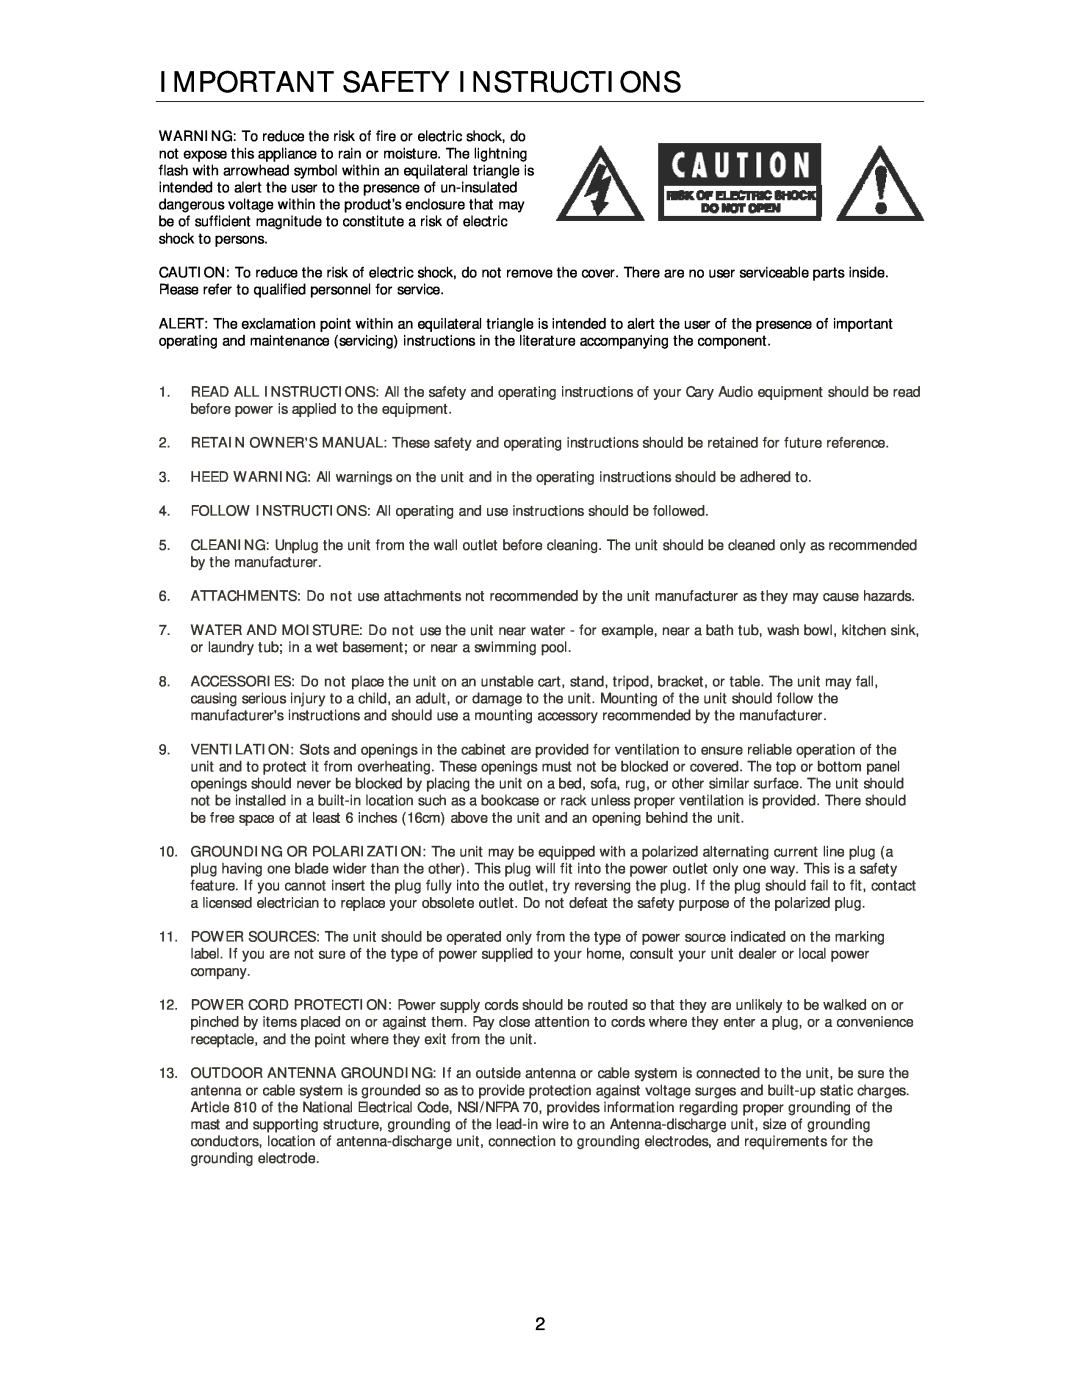 Cary Audio Design SLP 03 owner manual Important Safety Instructions 